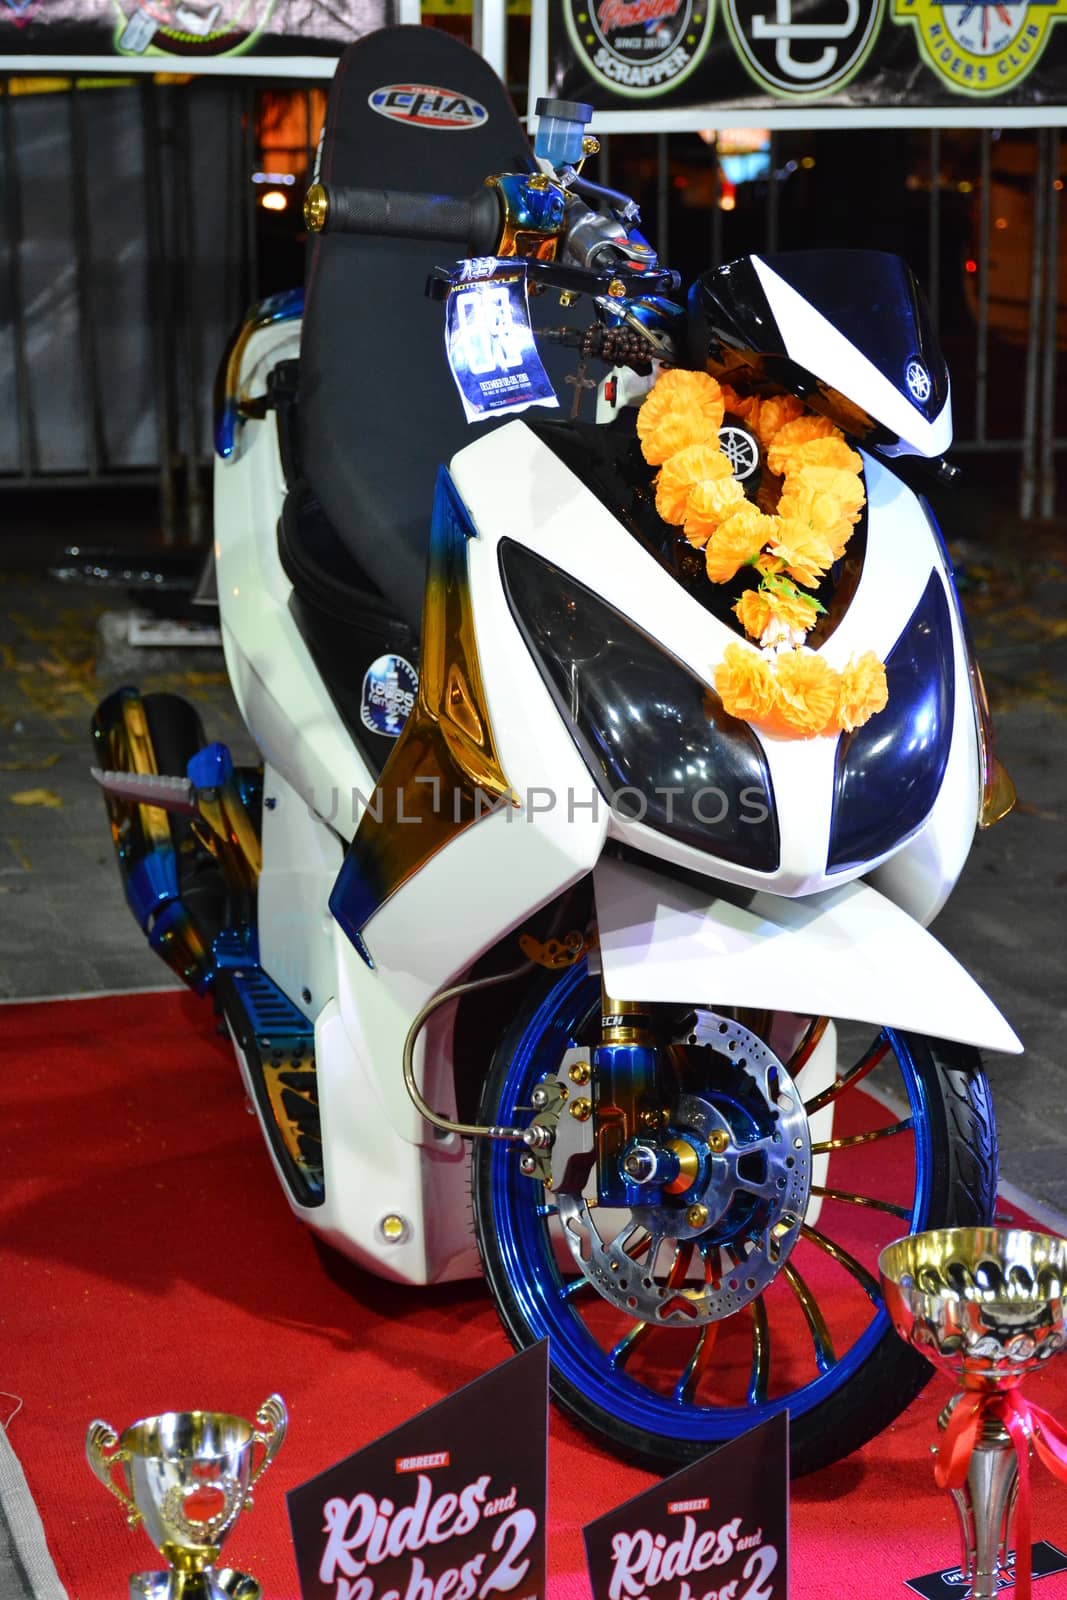 Yamaha motorcycle at Bumper to Bumper car show in Pasay, Philipp by imwaltersy